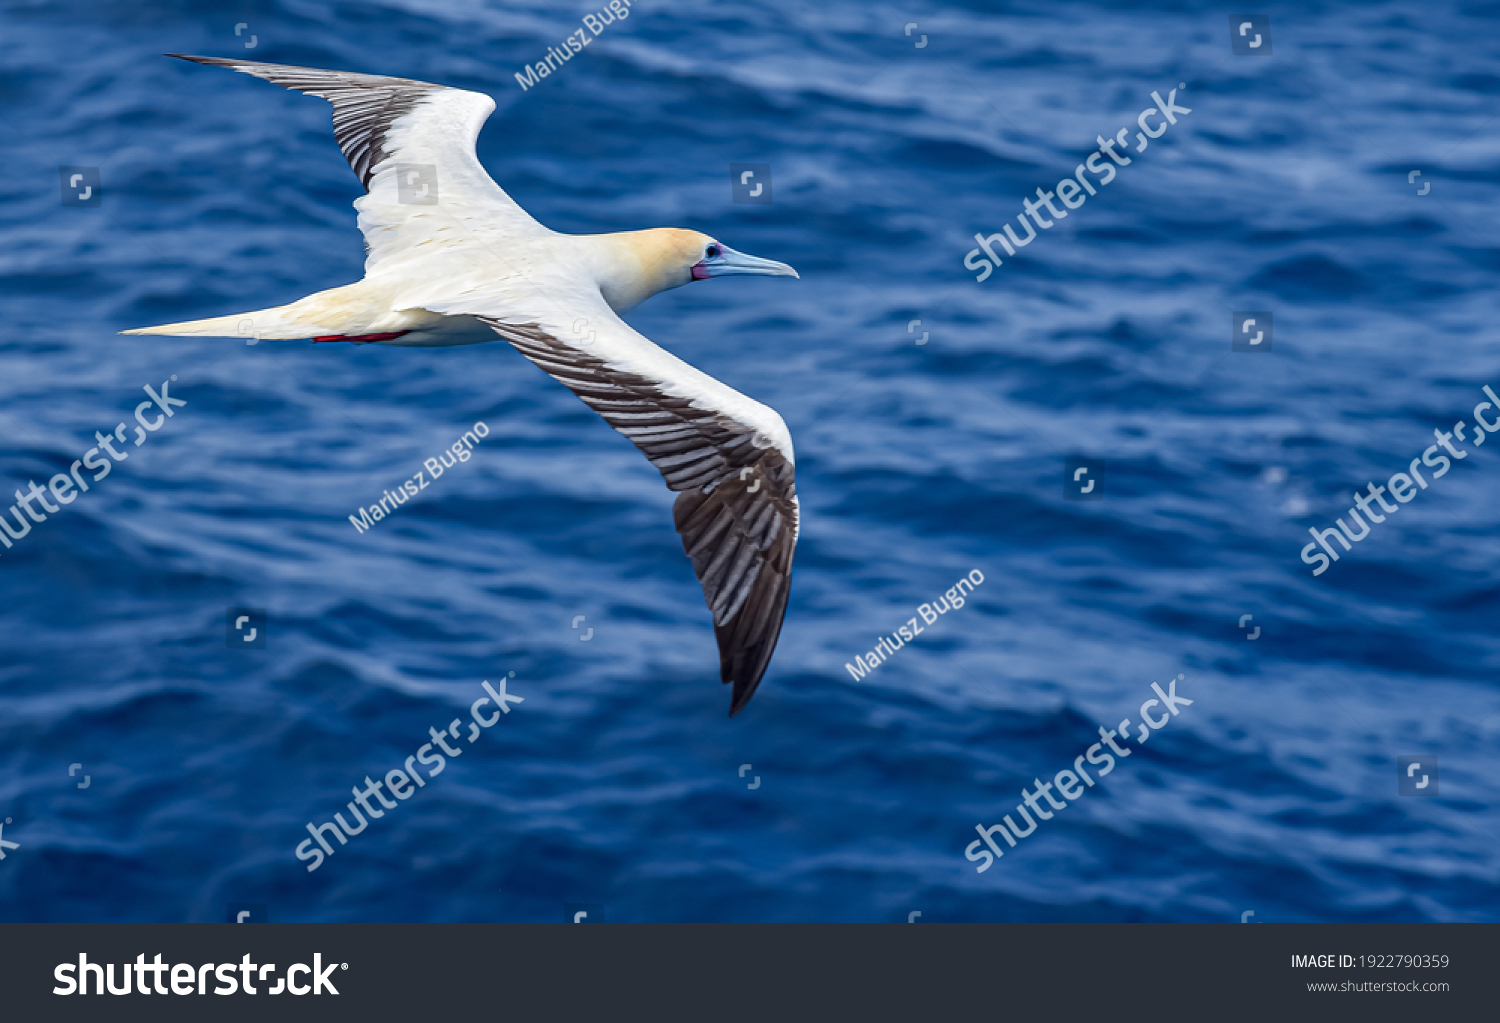 Seabird Masked, Blue-faced Booby (Sula dactylatra) flying over the blue, calm ocean. Seabird is hunting for flying fish jumping out of the water. #1922790359